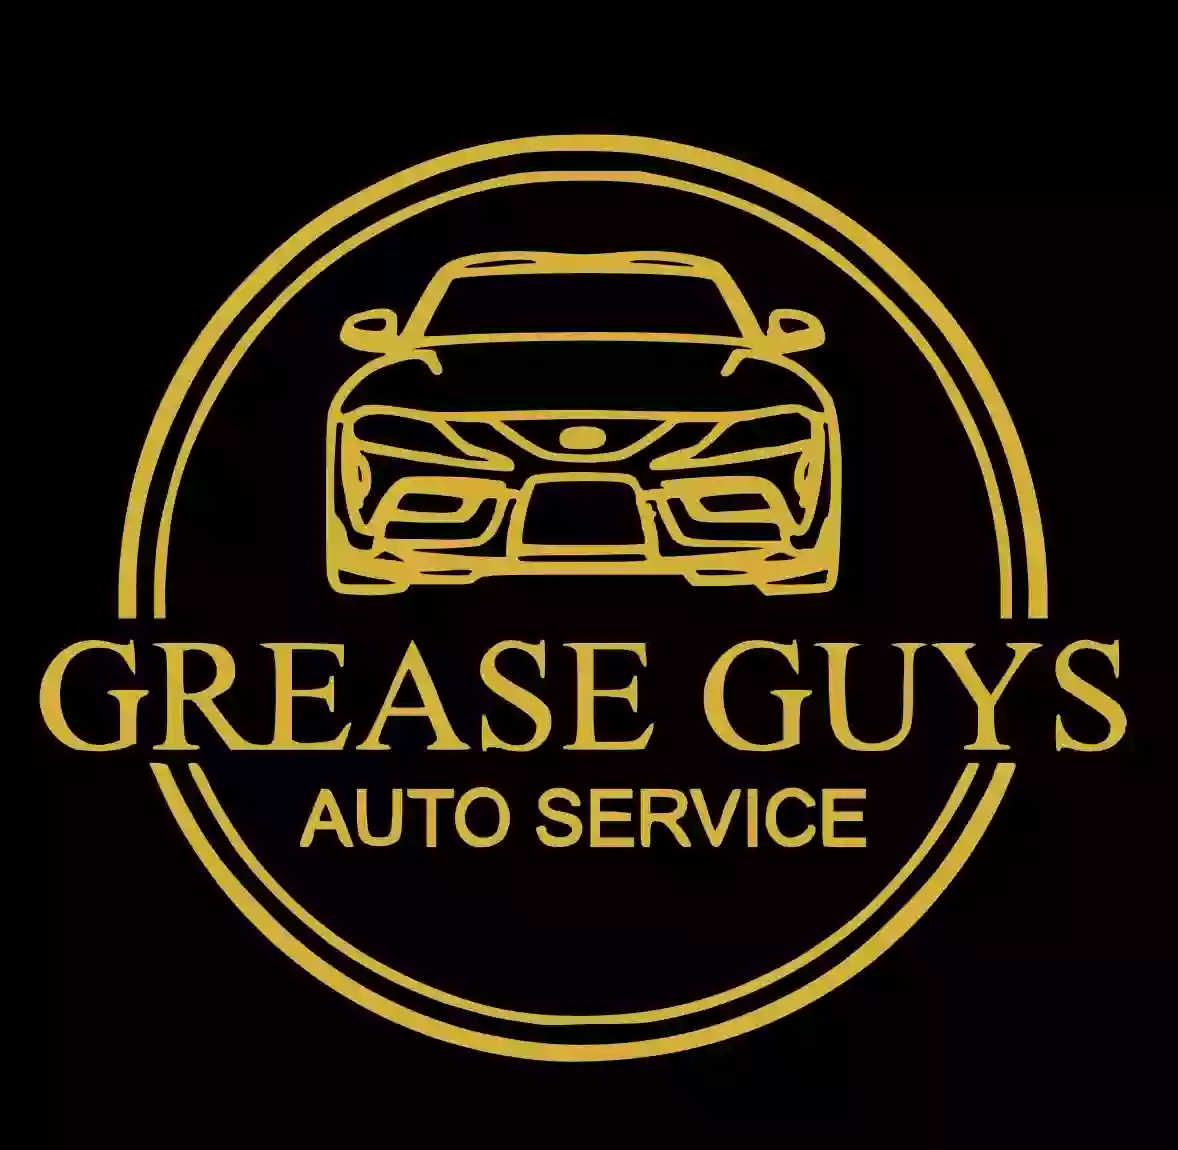 Grease Guys Auto Service Smog-Brake and Light Inspections